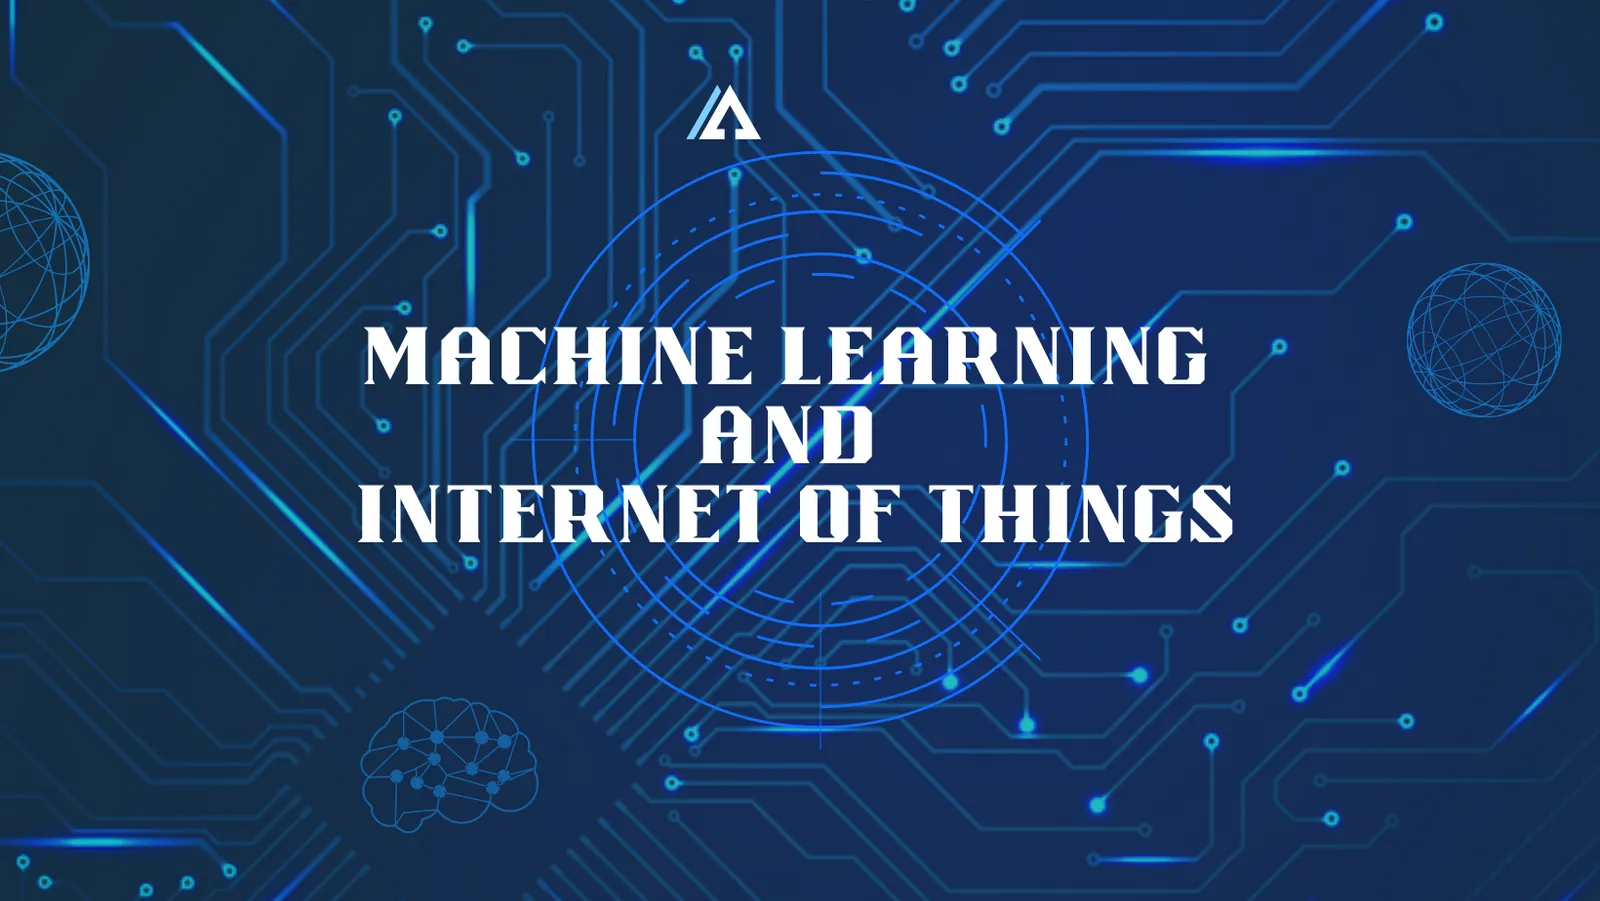 How Machine Learning and IoT can Benefit for Business and Our Lives